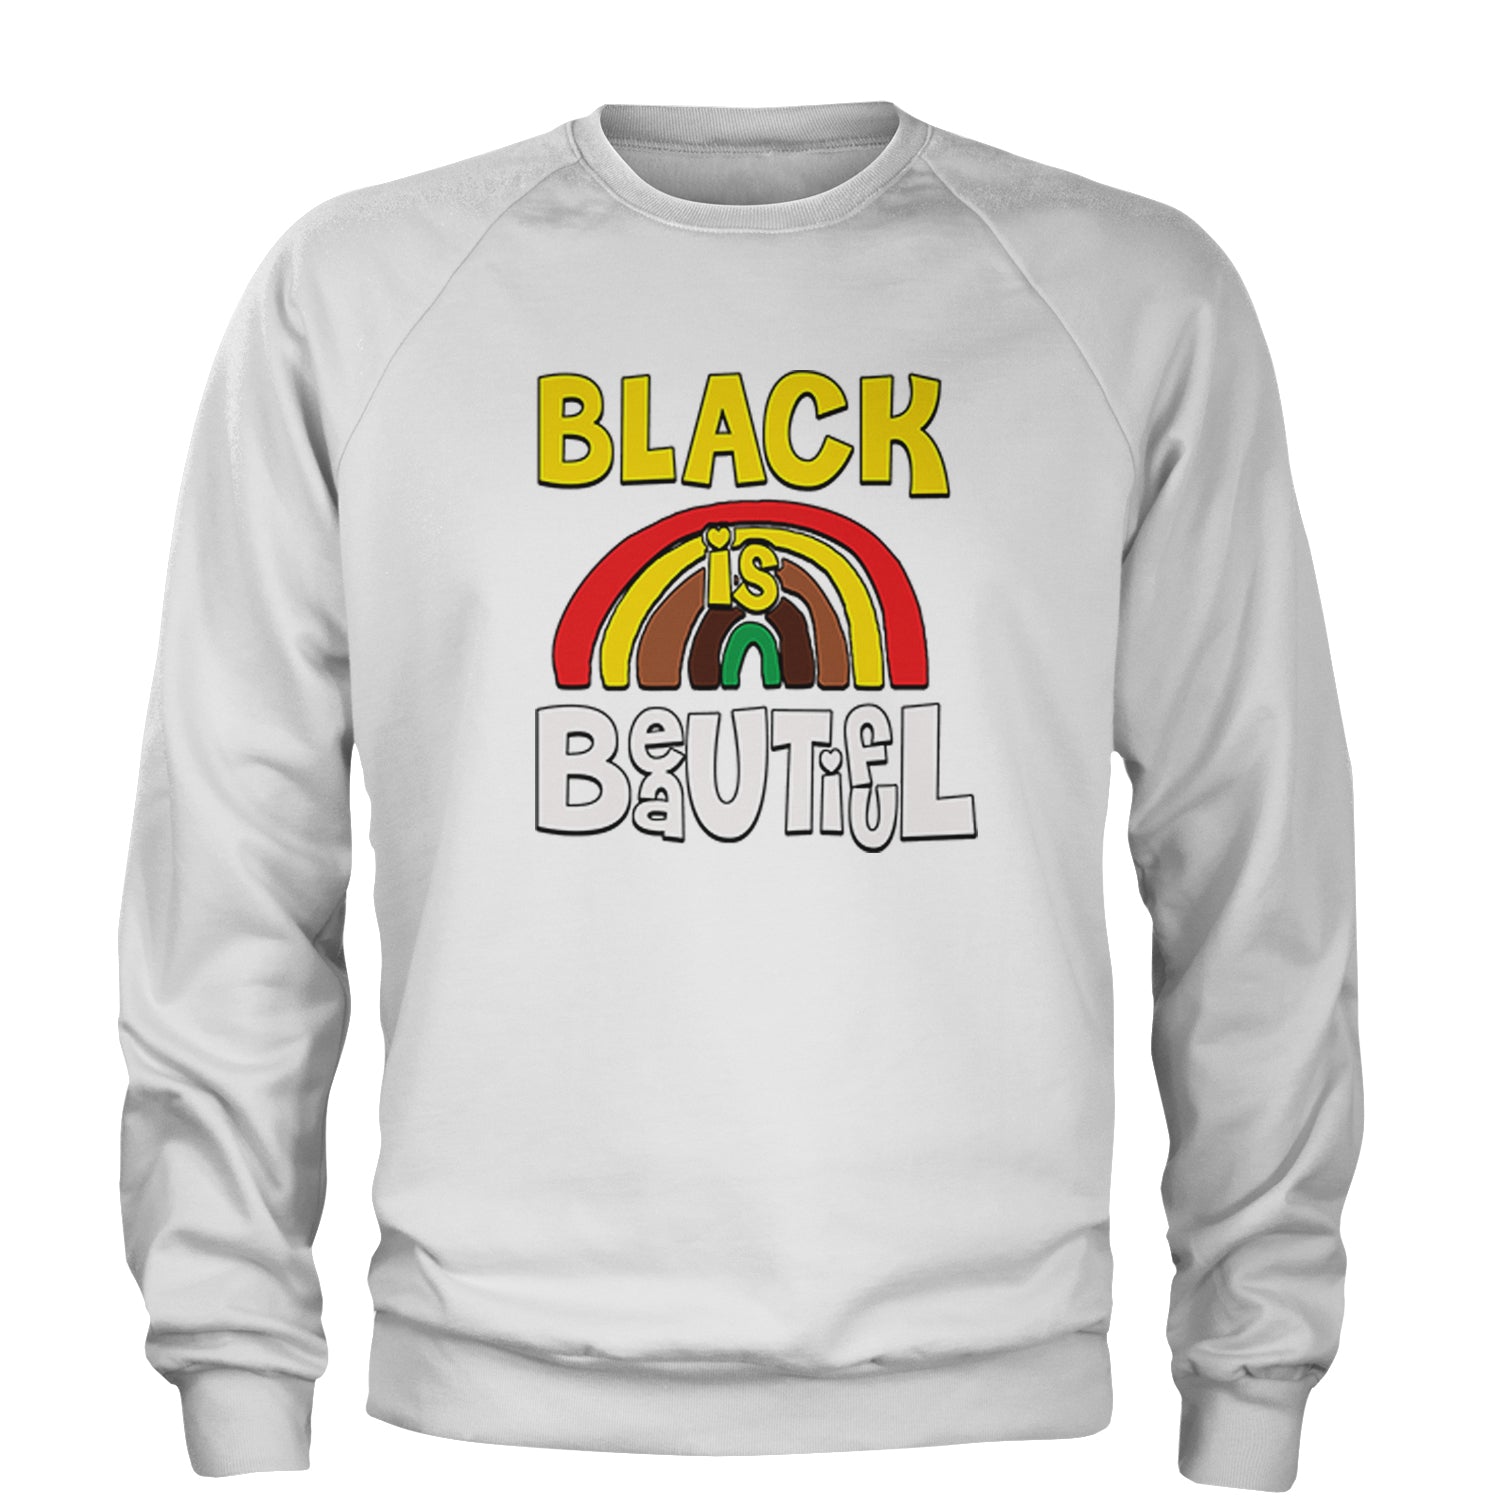 Black Is Beautiful Rainbow Adult Crewneck Sweatshirt african, africanamerican, american, black, blackpride, blm, harriet, king, lives, luther, malcolm, march, martin, matter, parks, protest, rosa, tubman, x by Expression Tees